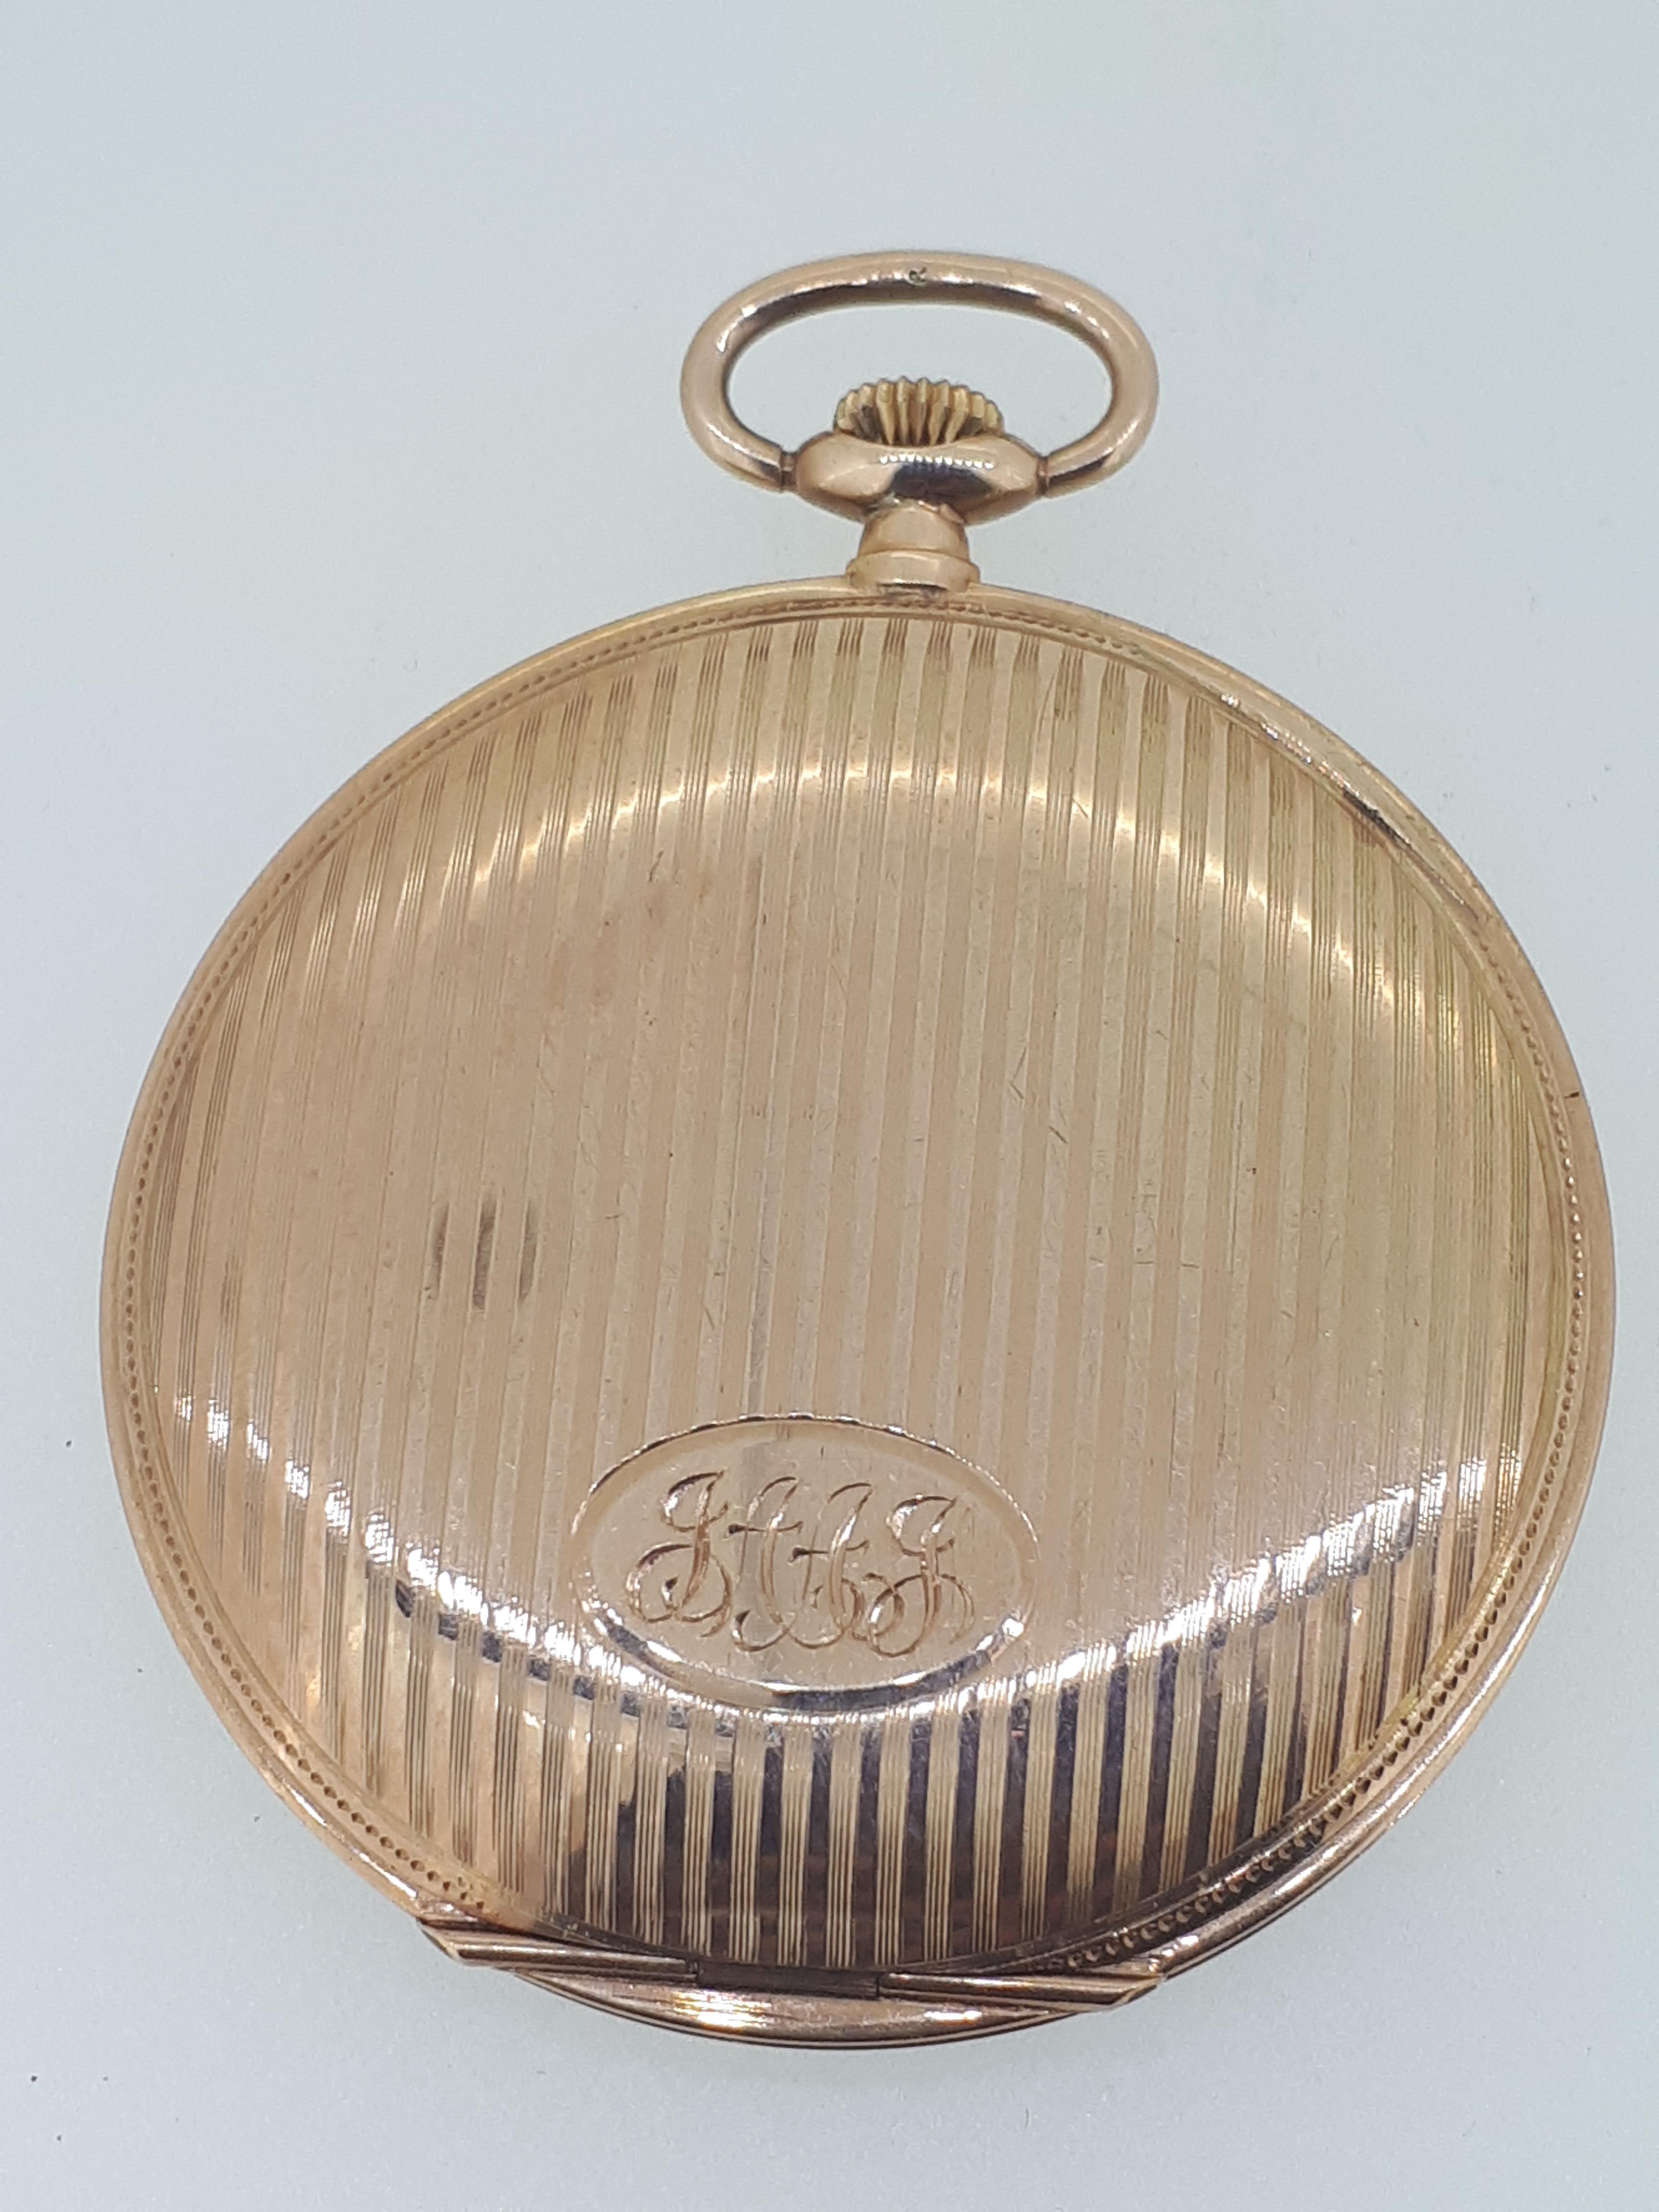 9ct (375) Yellow Gold Pocket Watch - Image 3 of 9